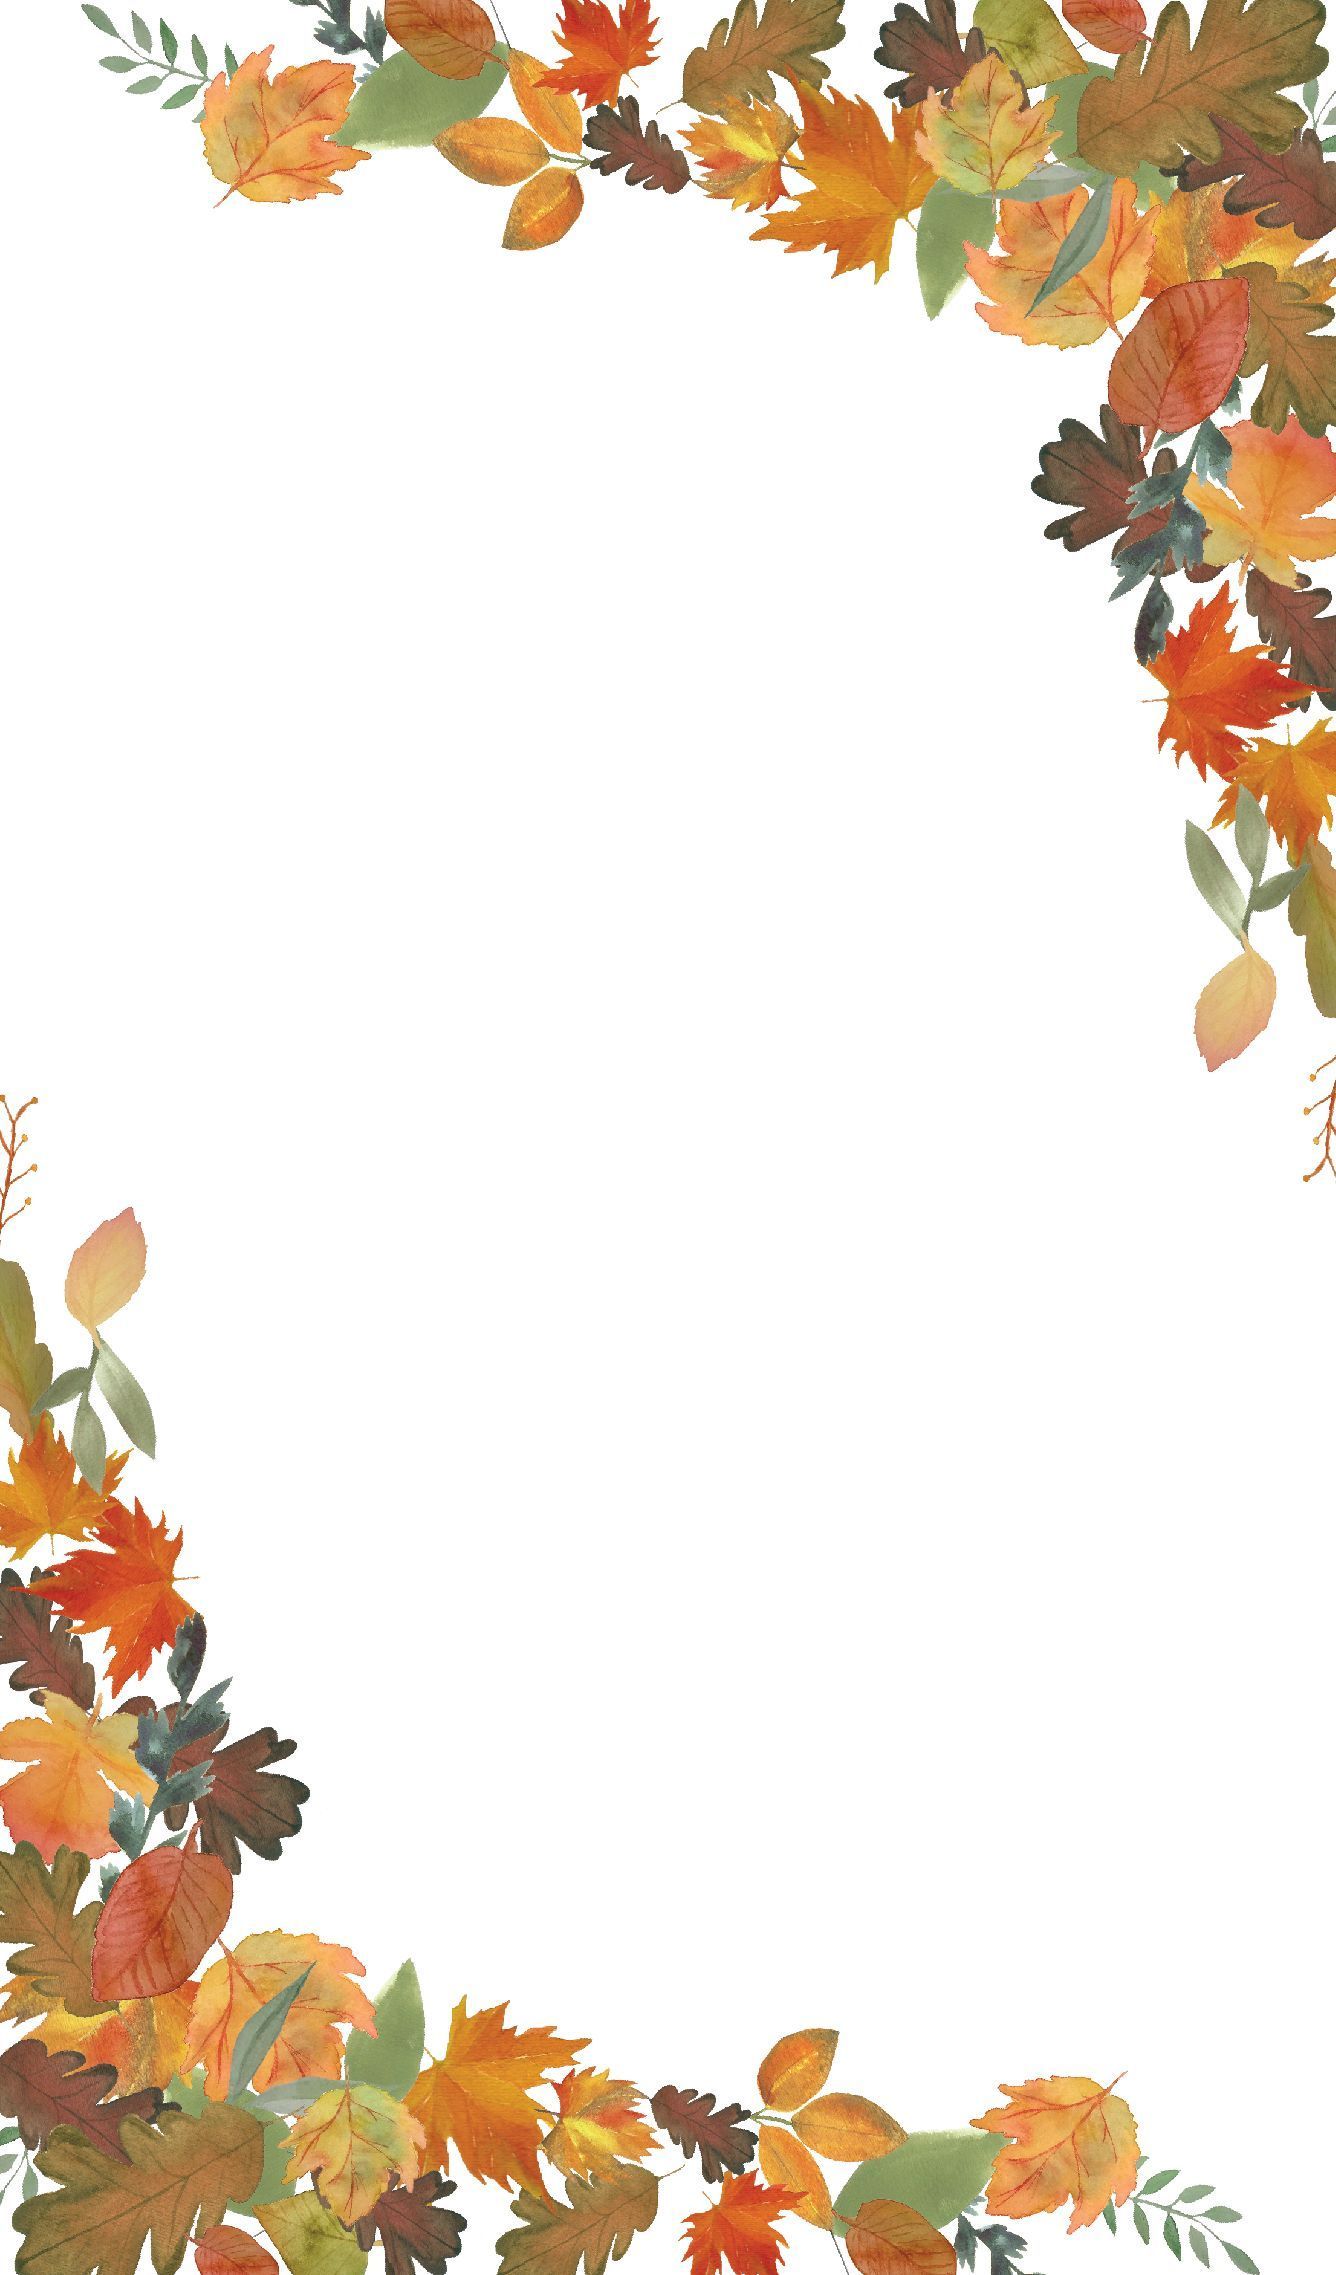 Fall Leaves Wallpaper for iPhone #falliphonewallpaper Cute, free, fall and autumn iphone w. Autumn leaves wallpaper, iPhone wallpaper fall, Autumn phone wallpaper